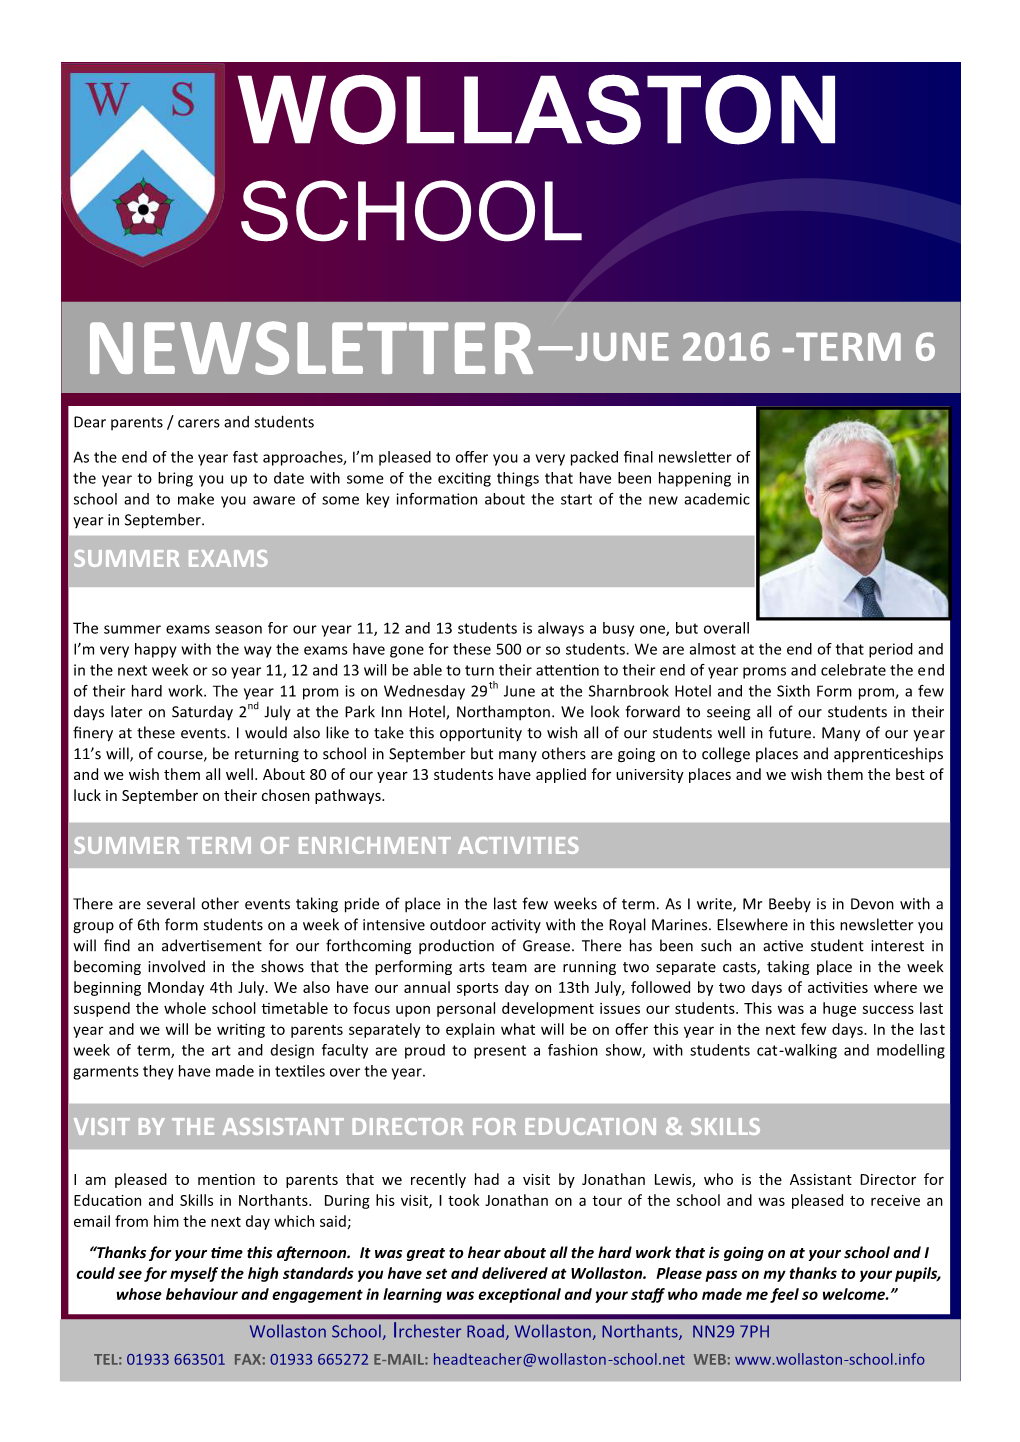 NEWSLETTER—JUNE 2016 -TERM 6 Dear Parents / Carers and Students